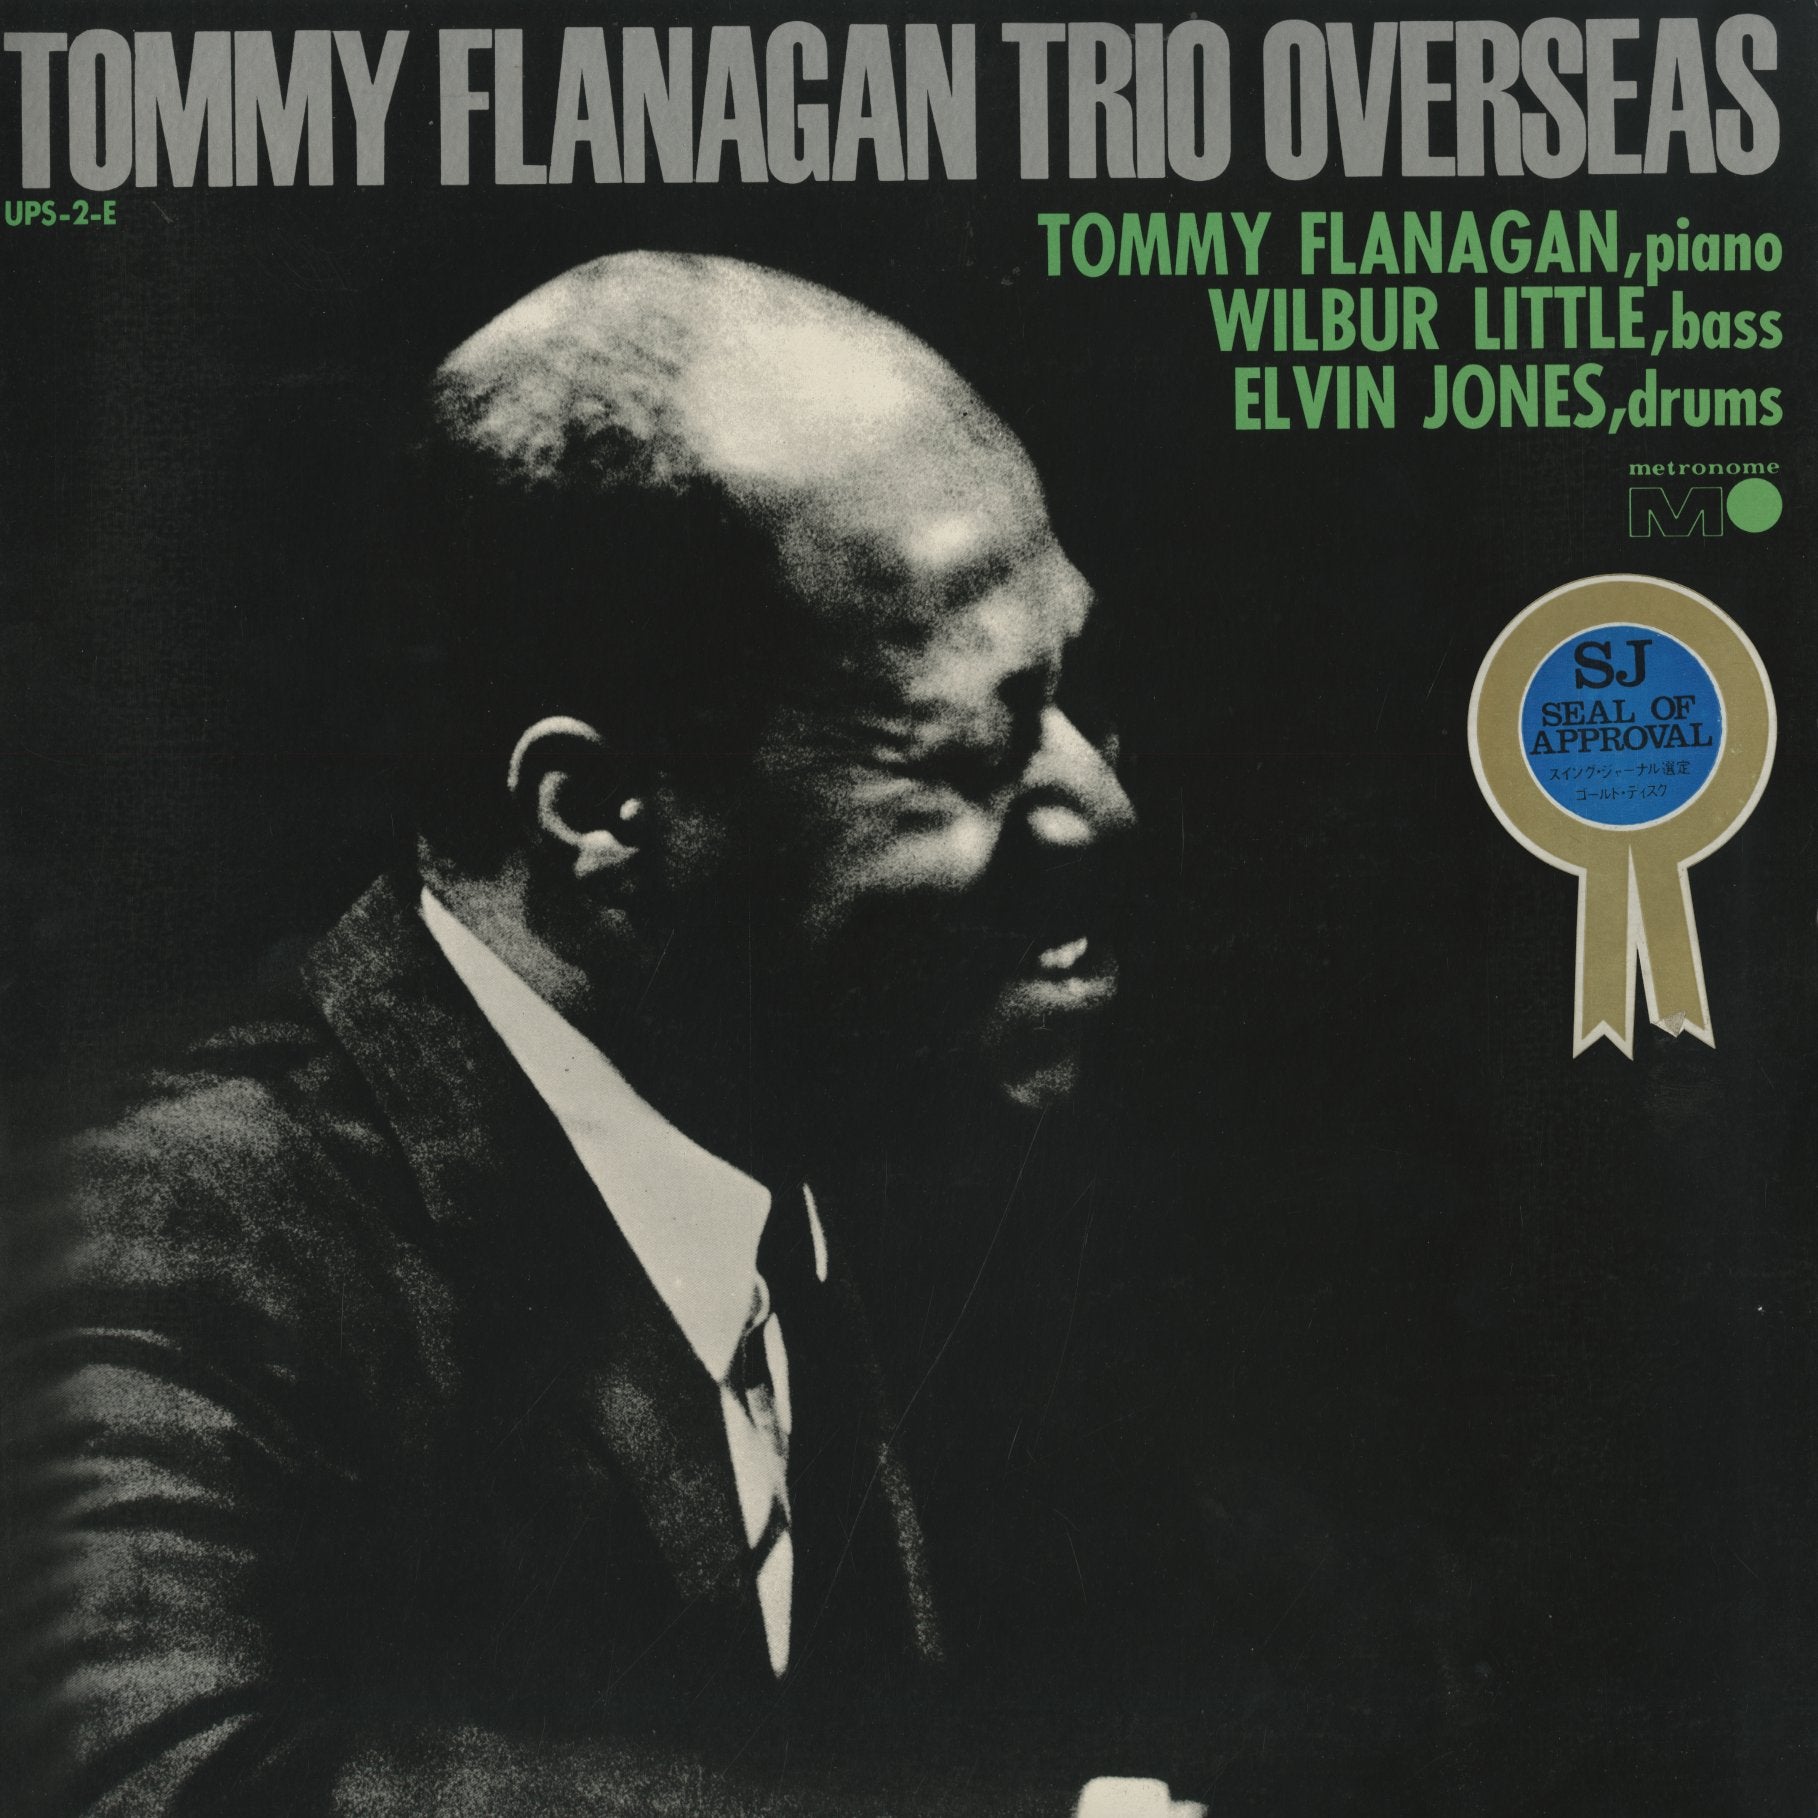 Tommy Flanagan / トミー・フラナガン / Overseas (UPS-2-E 